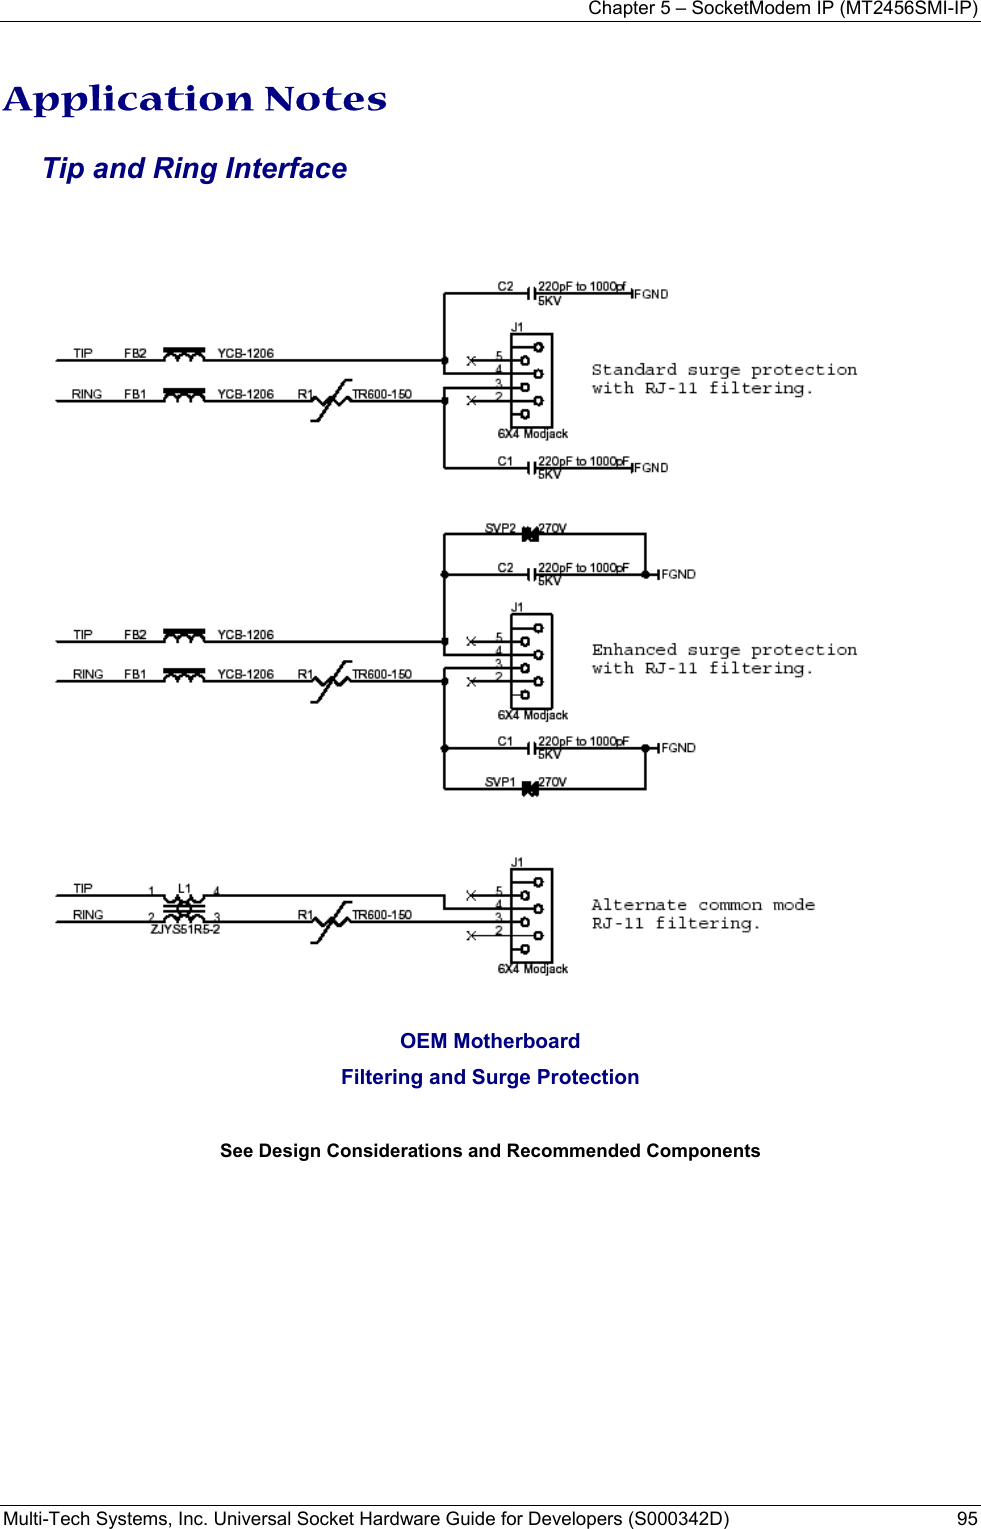 Chapter 5 – SocketModem IP (MT2456SMI-IP) Multi-Tech Systems, Inc. Universal Socket Hardware Guide for Developers (S000342D)  95  Application Notes  Tip and Ring Interface     OEM Motherboard Filtering and Surge Protection  See Design Considerations and Recommended Components 